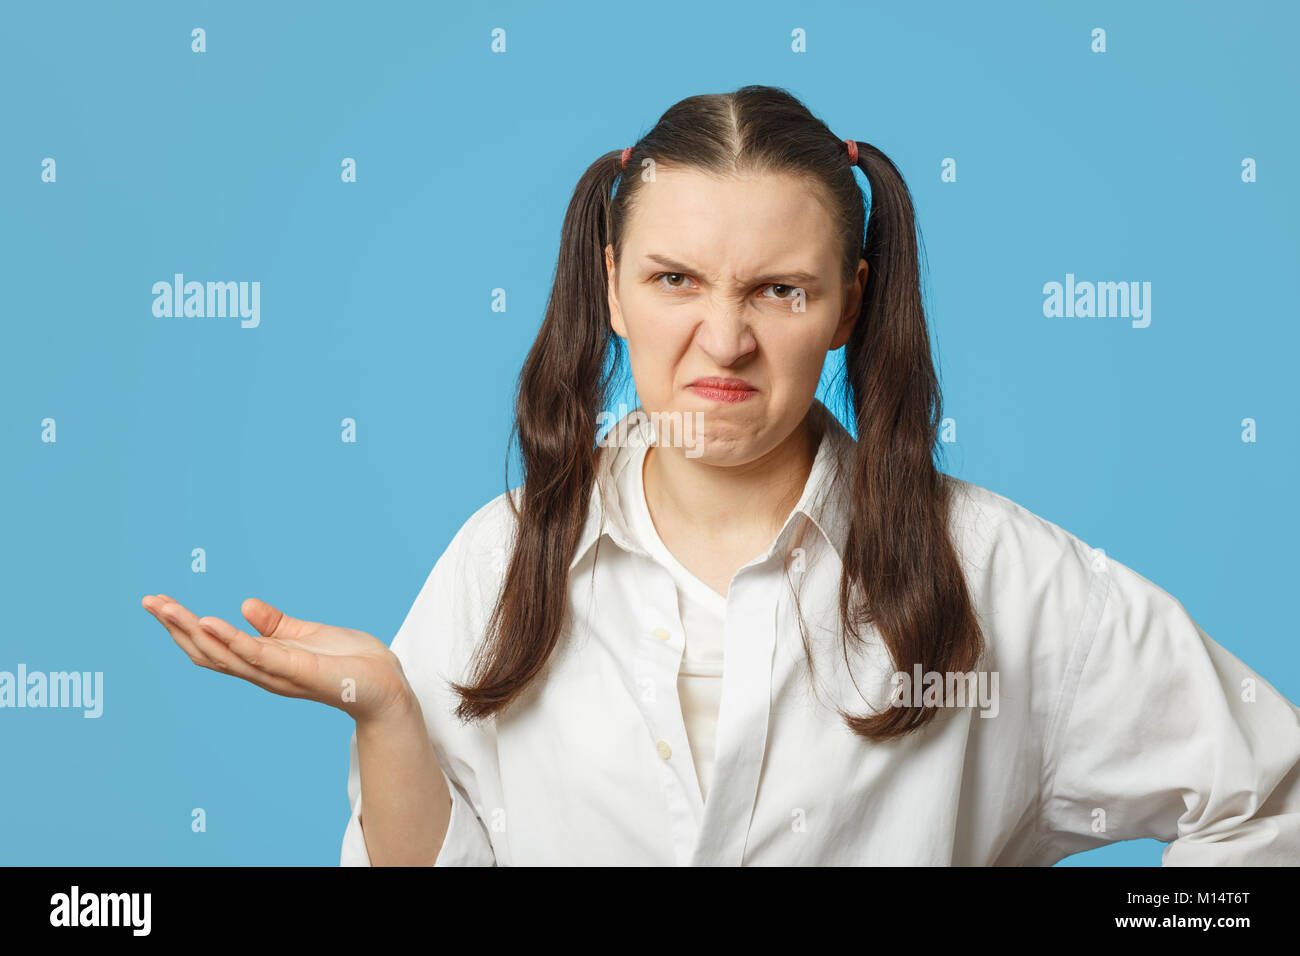 fun girl making a grimace on blue background Stock Photo